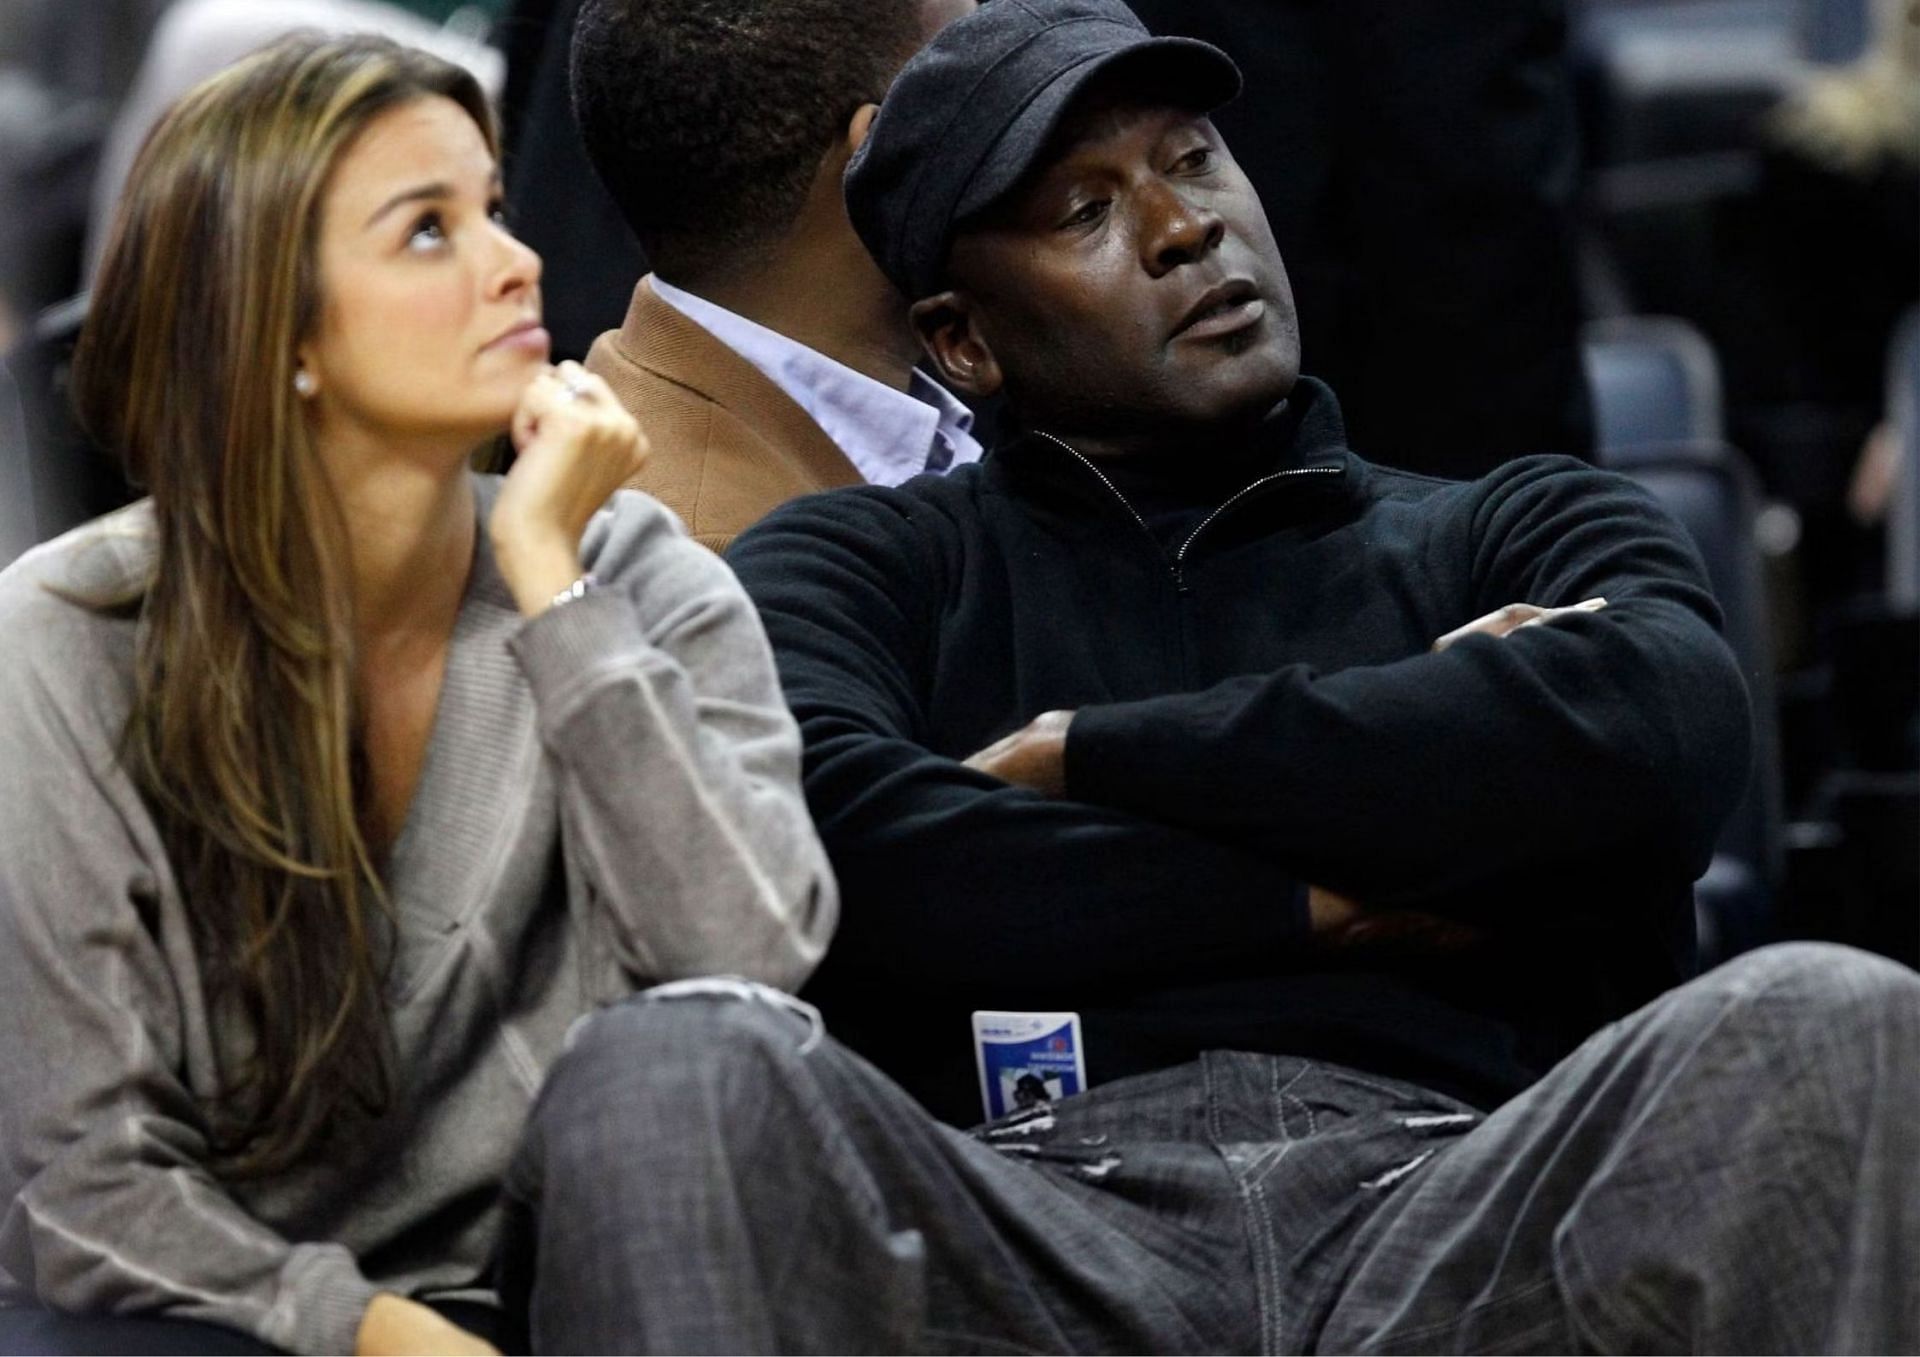 Power couple Michael Jordan and Yvette Prieto watching a Charlotte Hornets game.